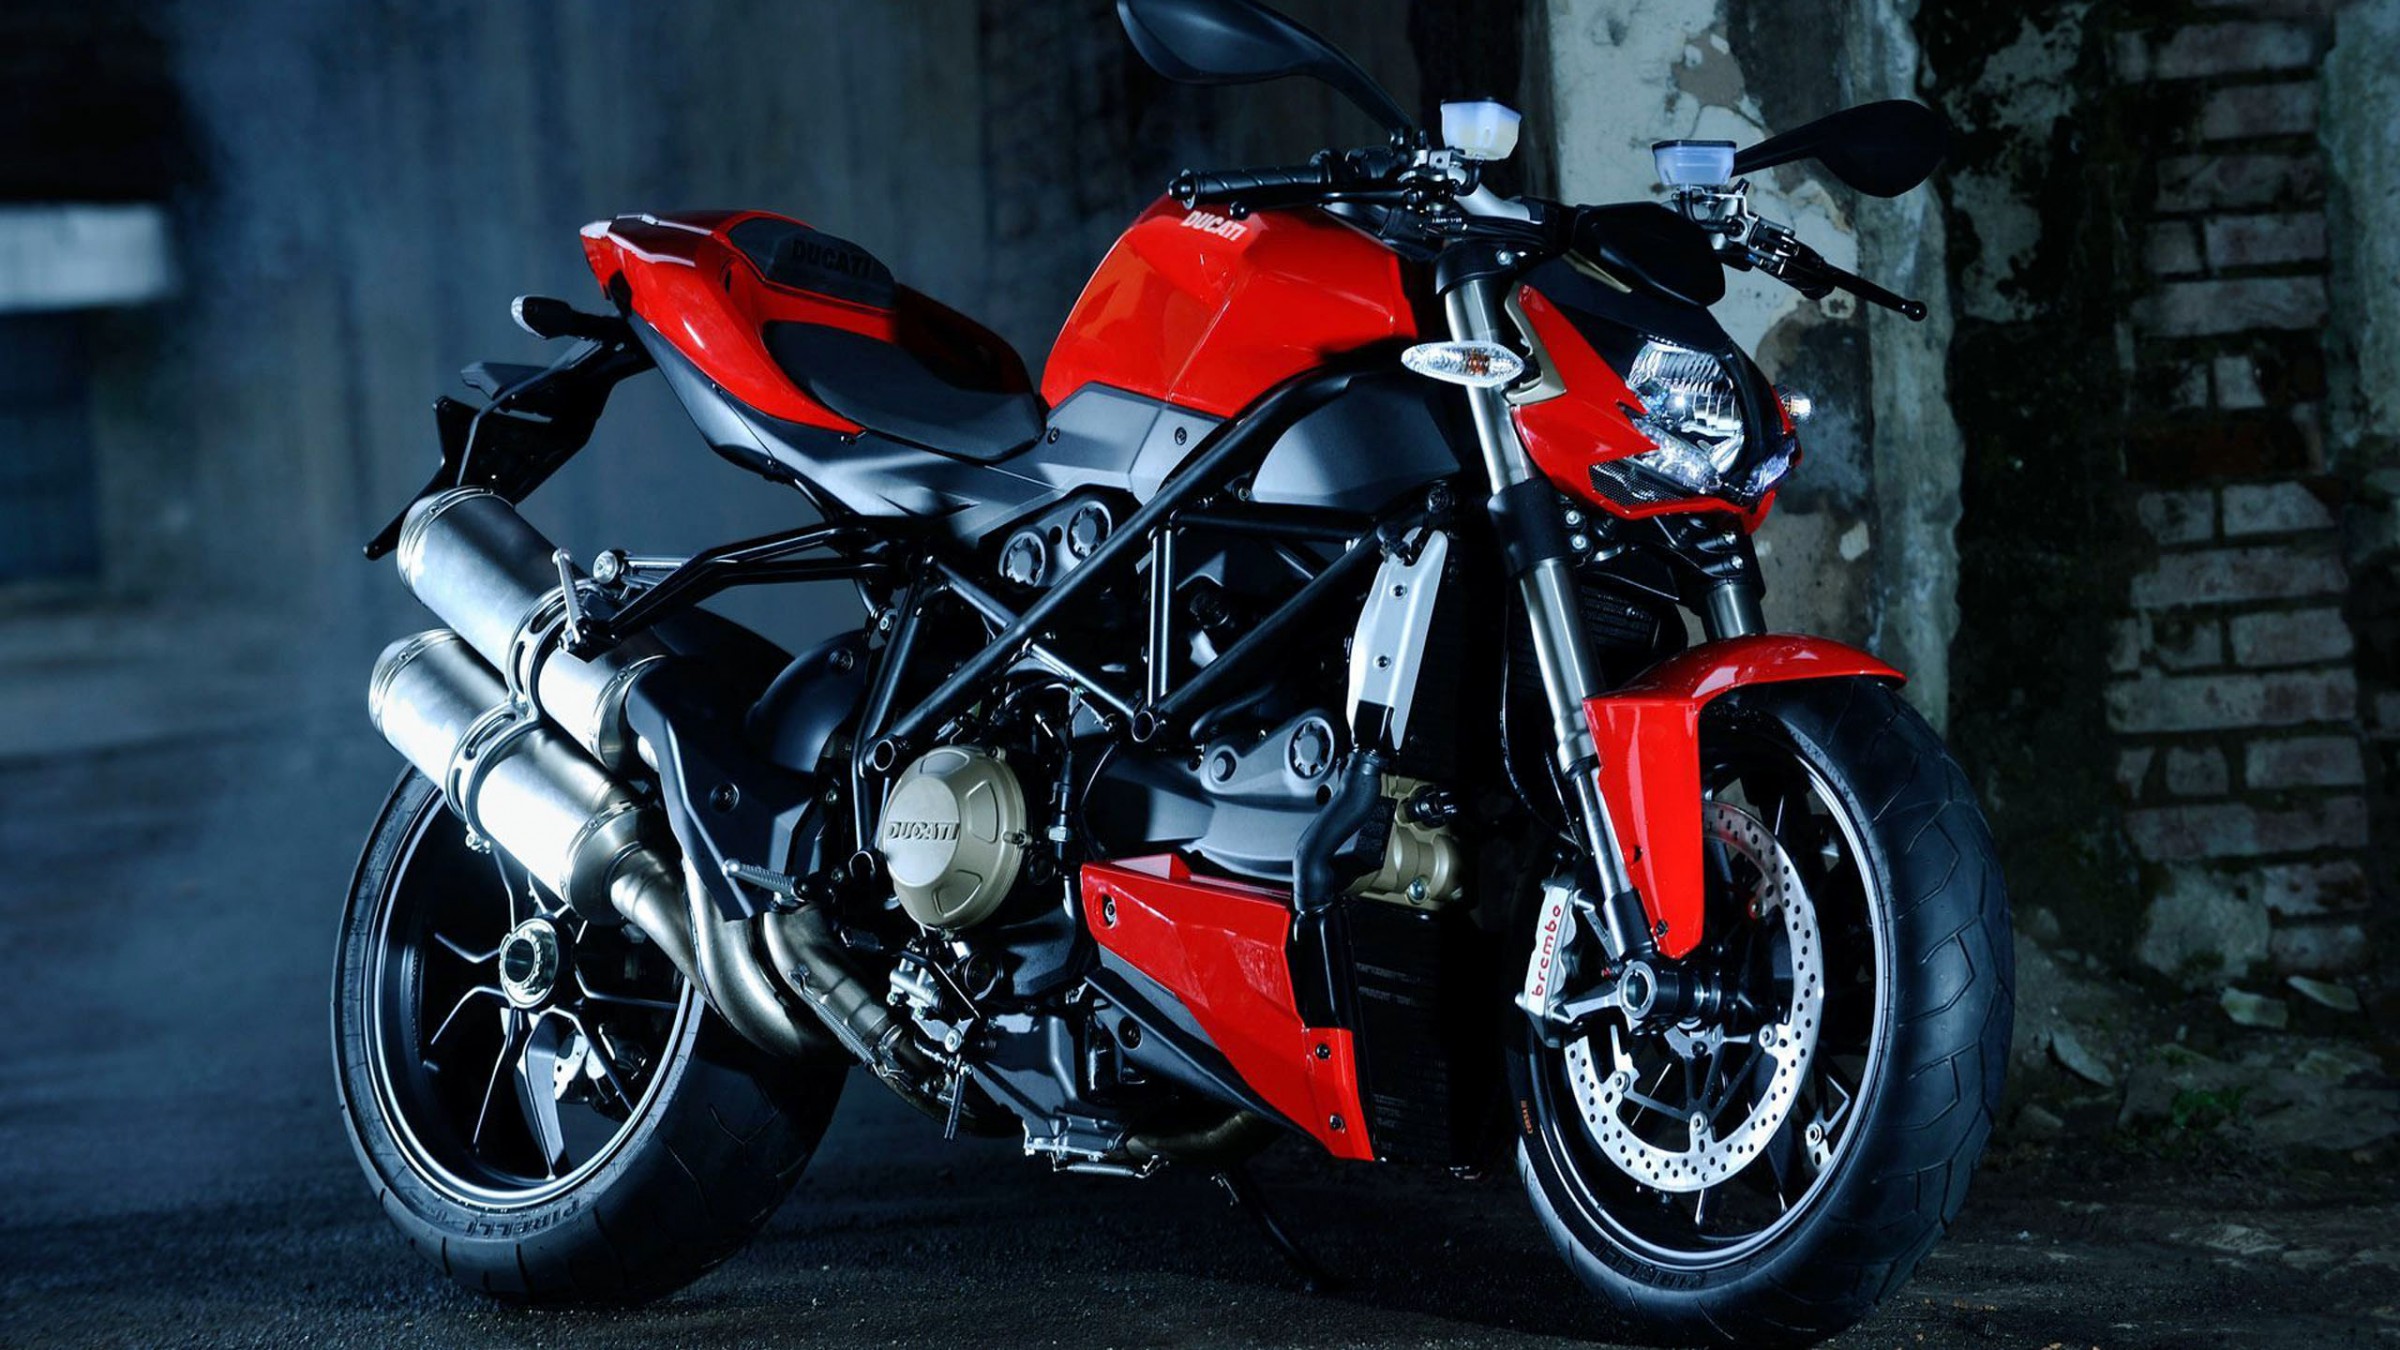 1080p Ducati Streetfighter Hd Images